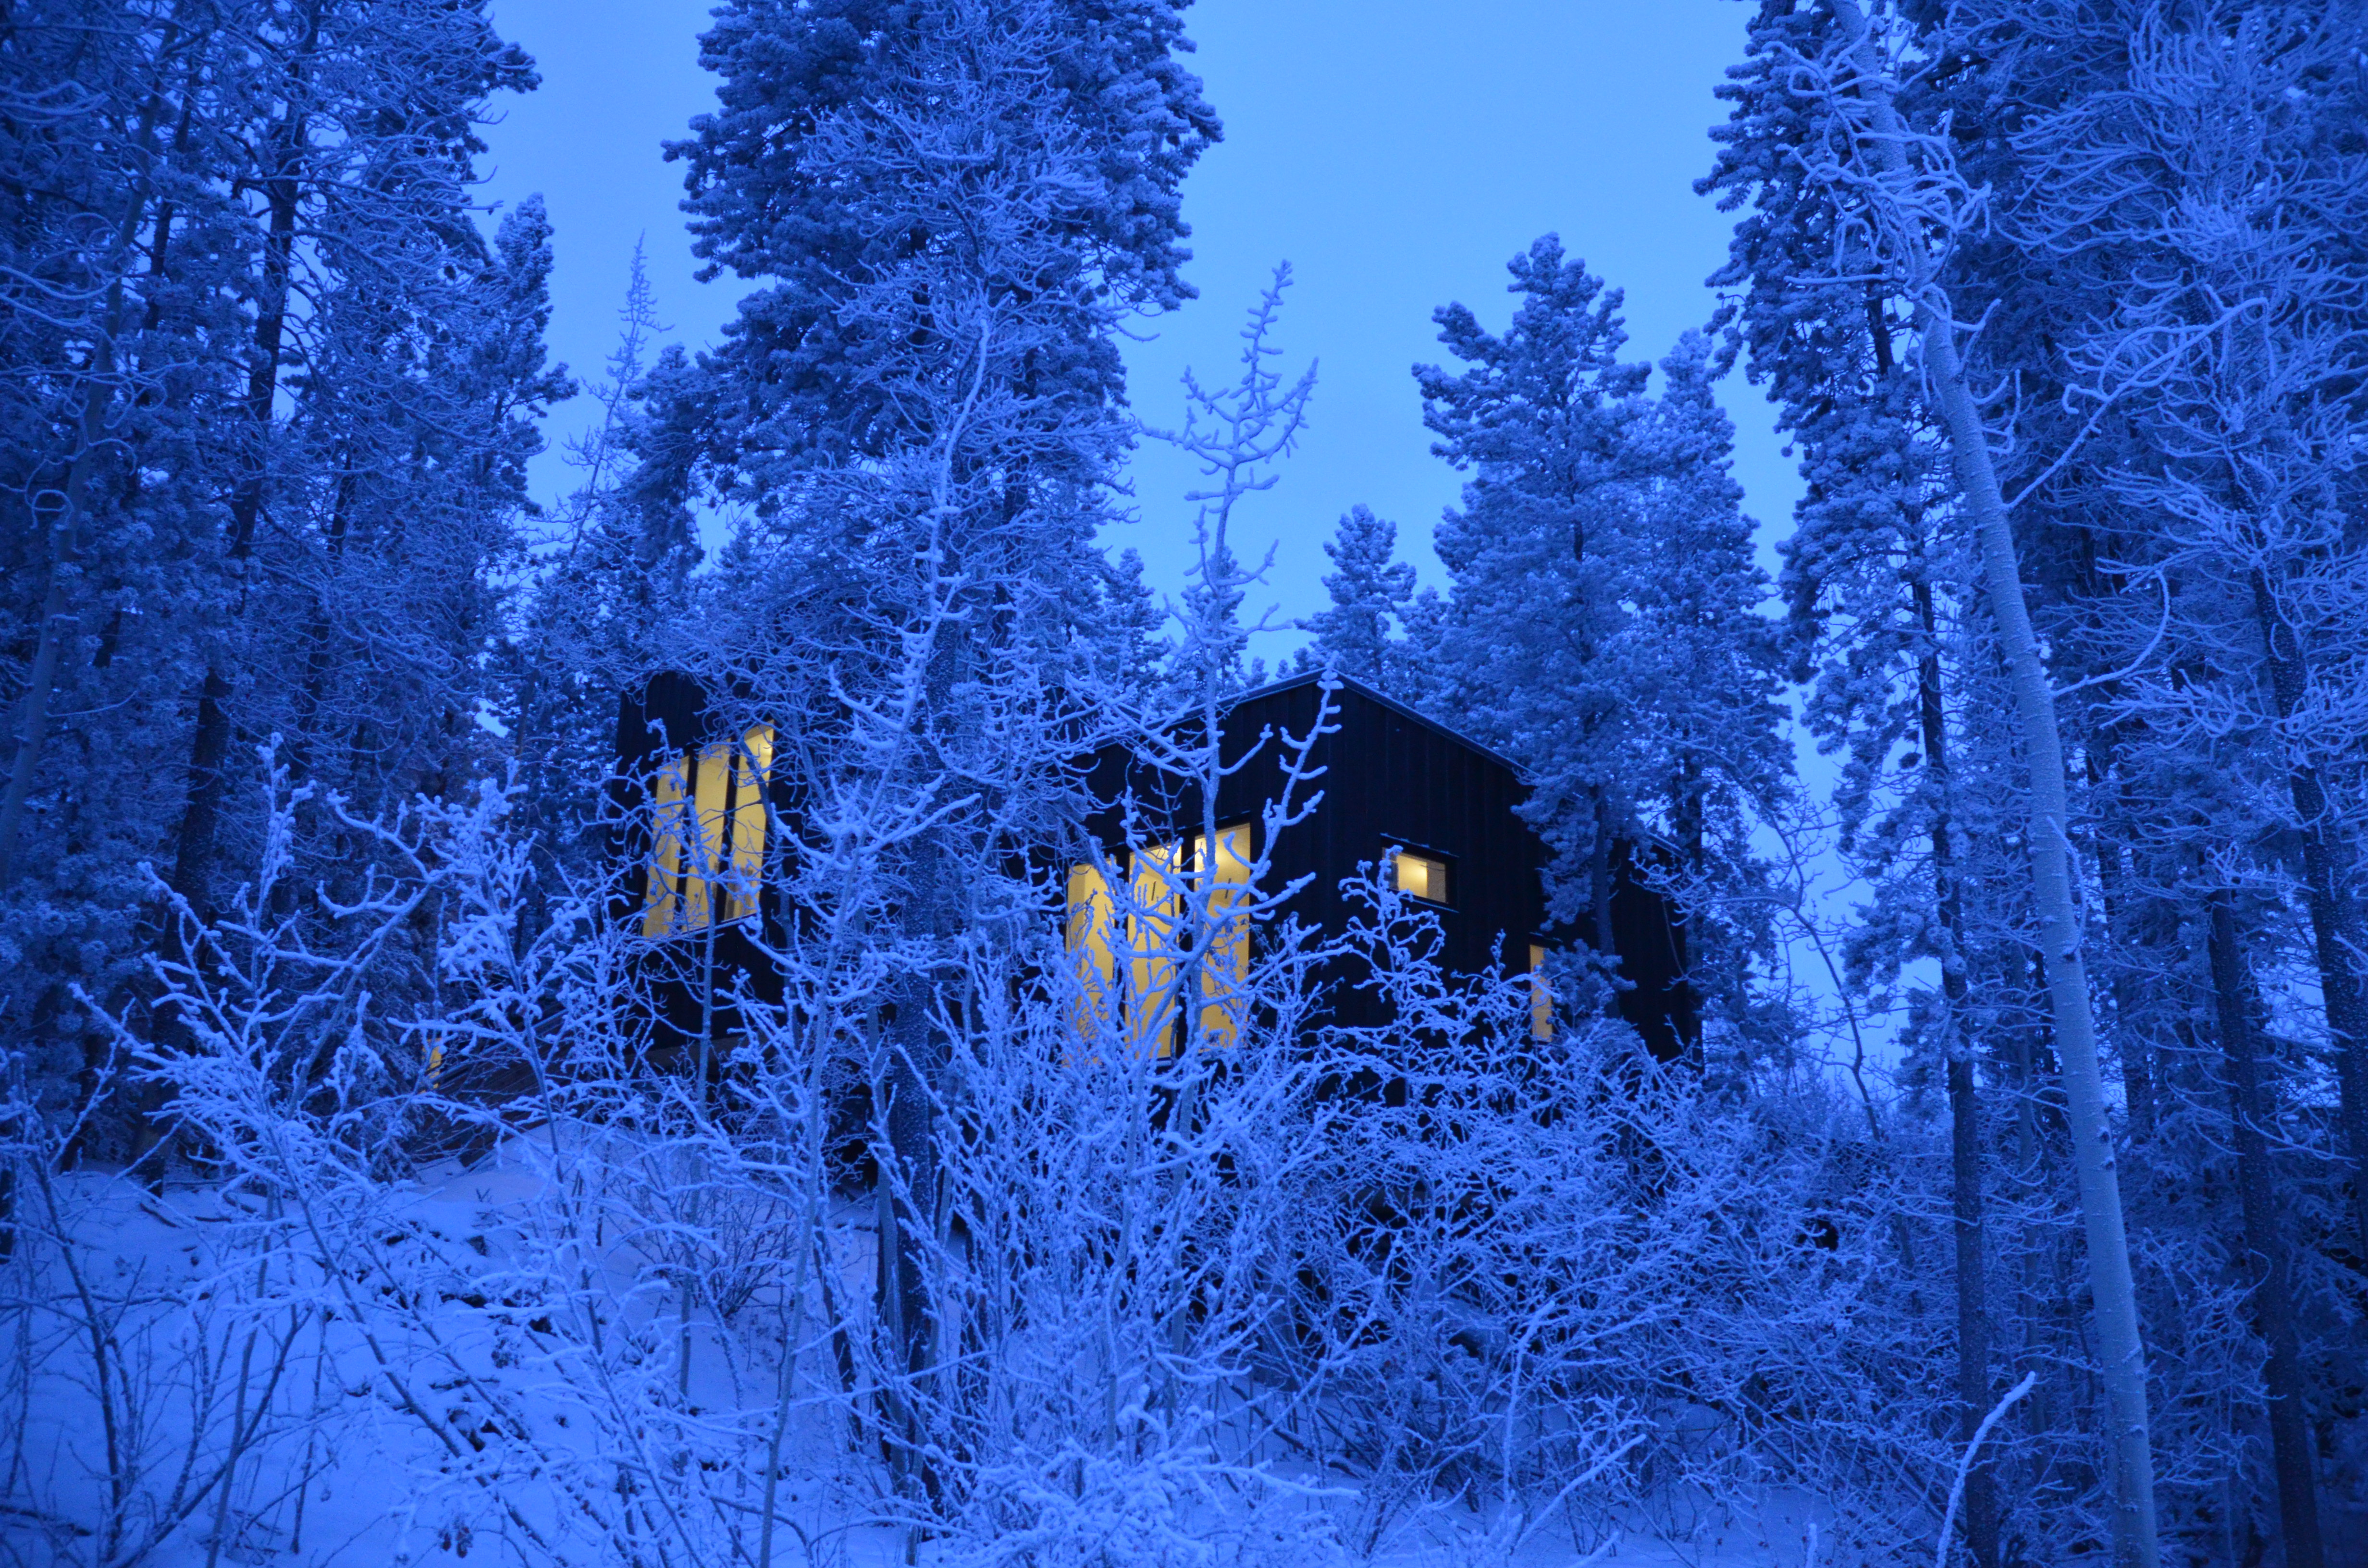 A cabin at twilight in the winter surrounded by snow-capped trees